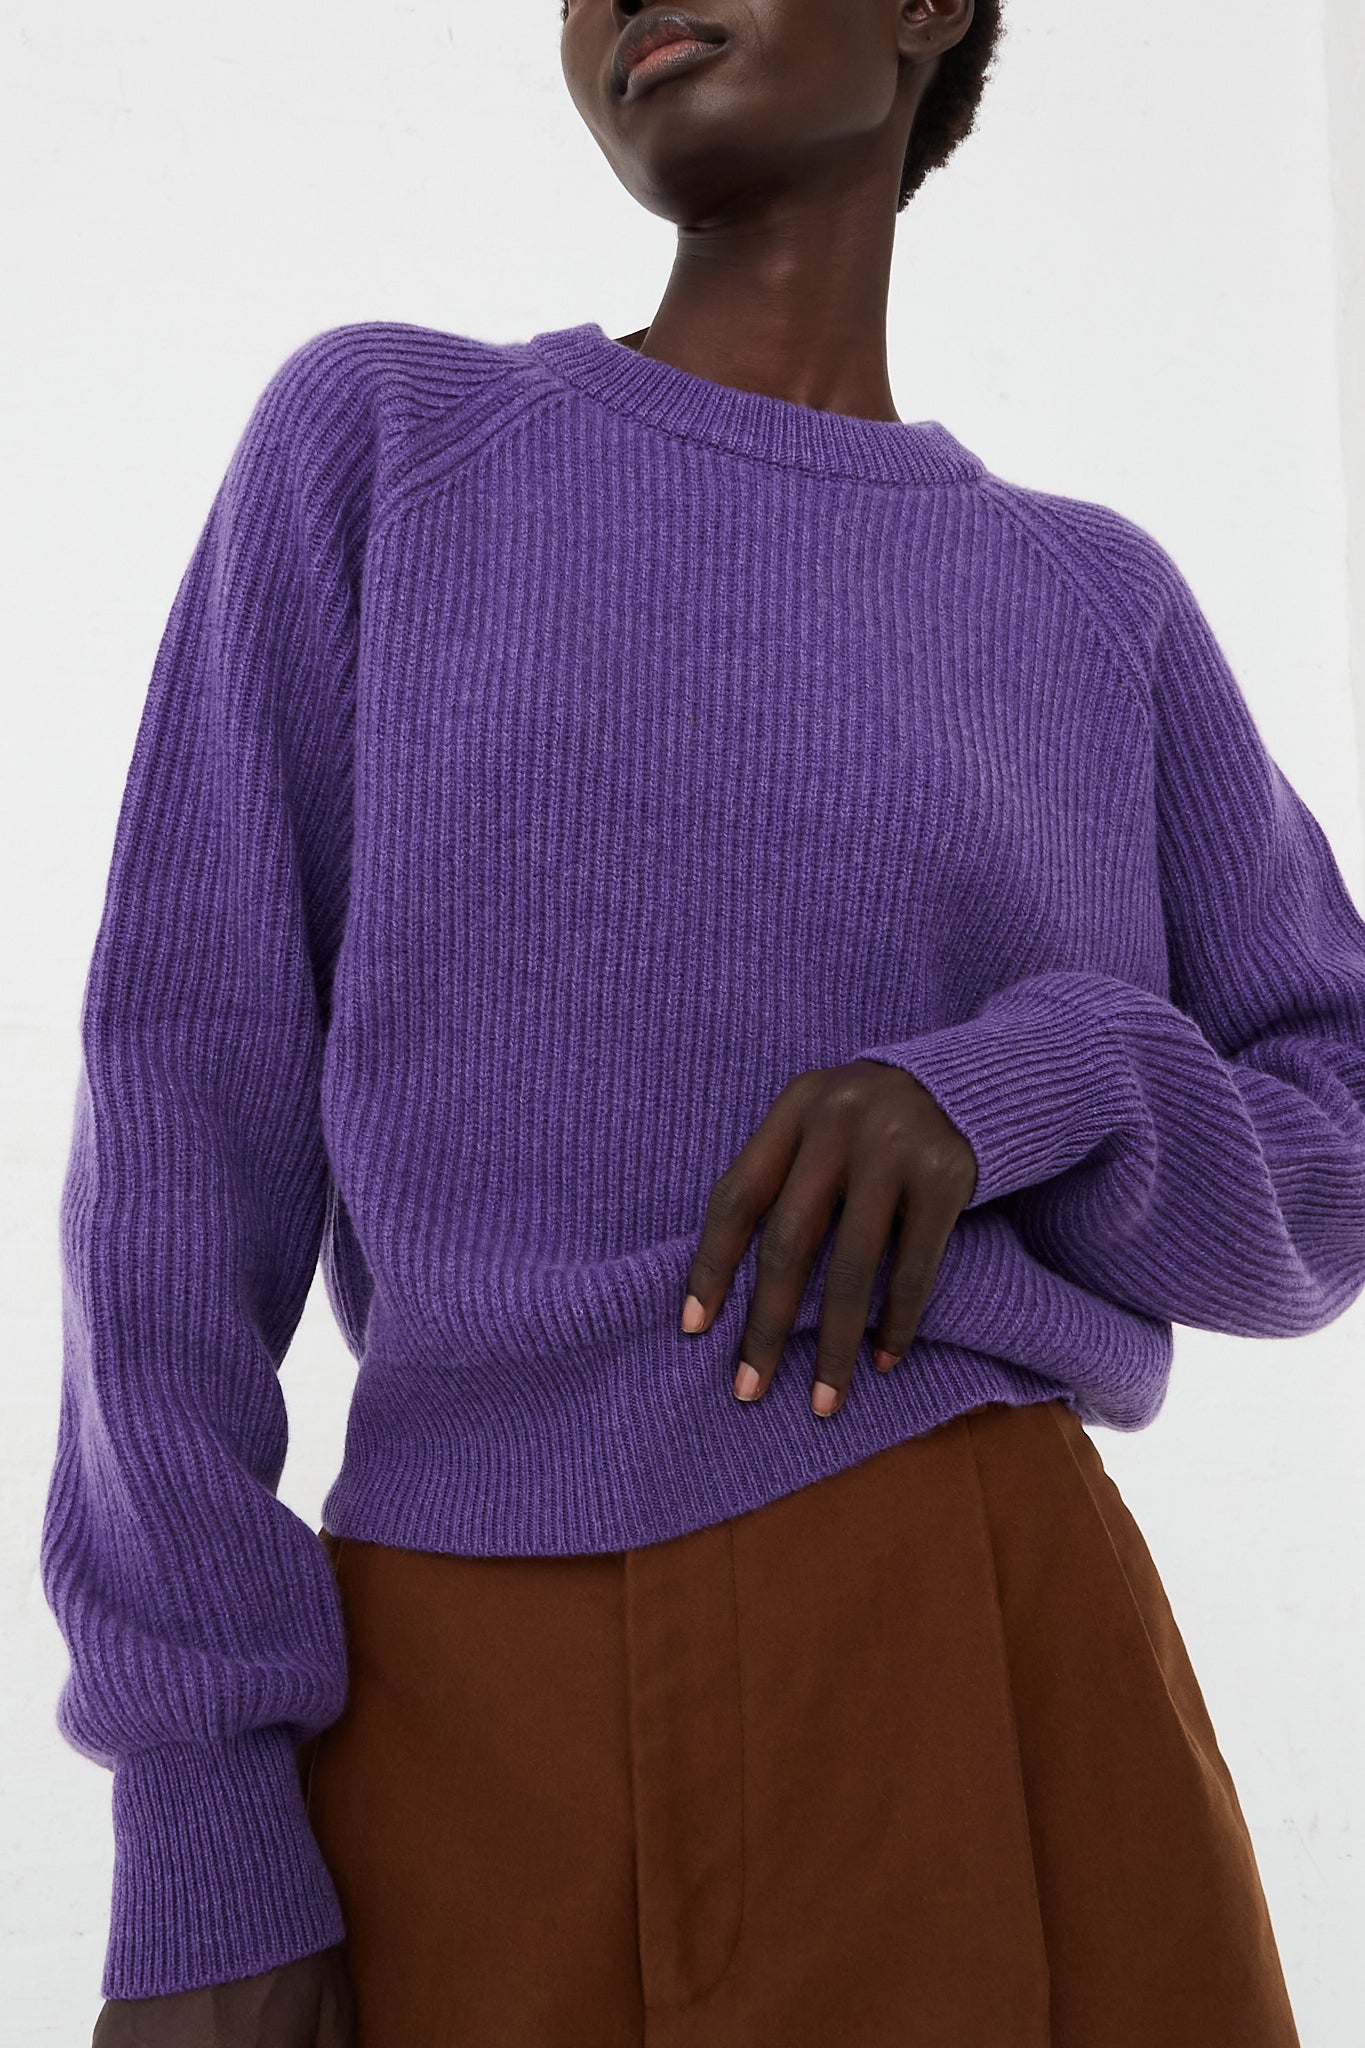 Ribbed Raglan Cashmere Cropped Sweater Purple by CristaSeya for Oroboro Front Upclose